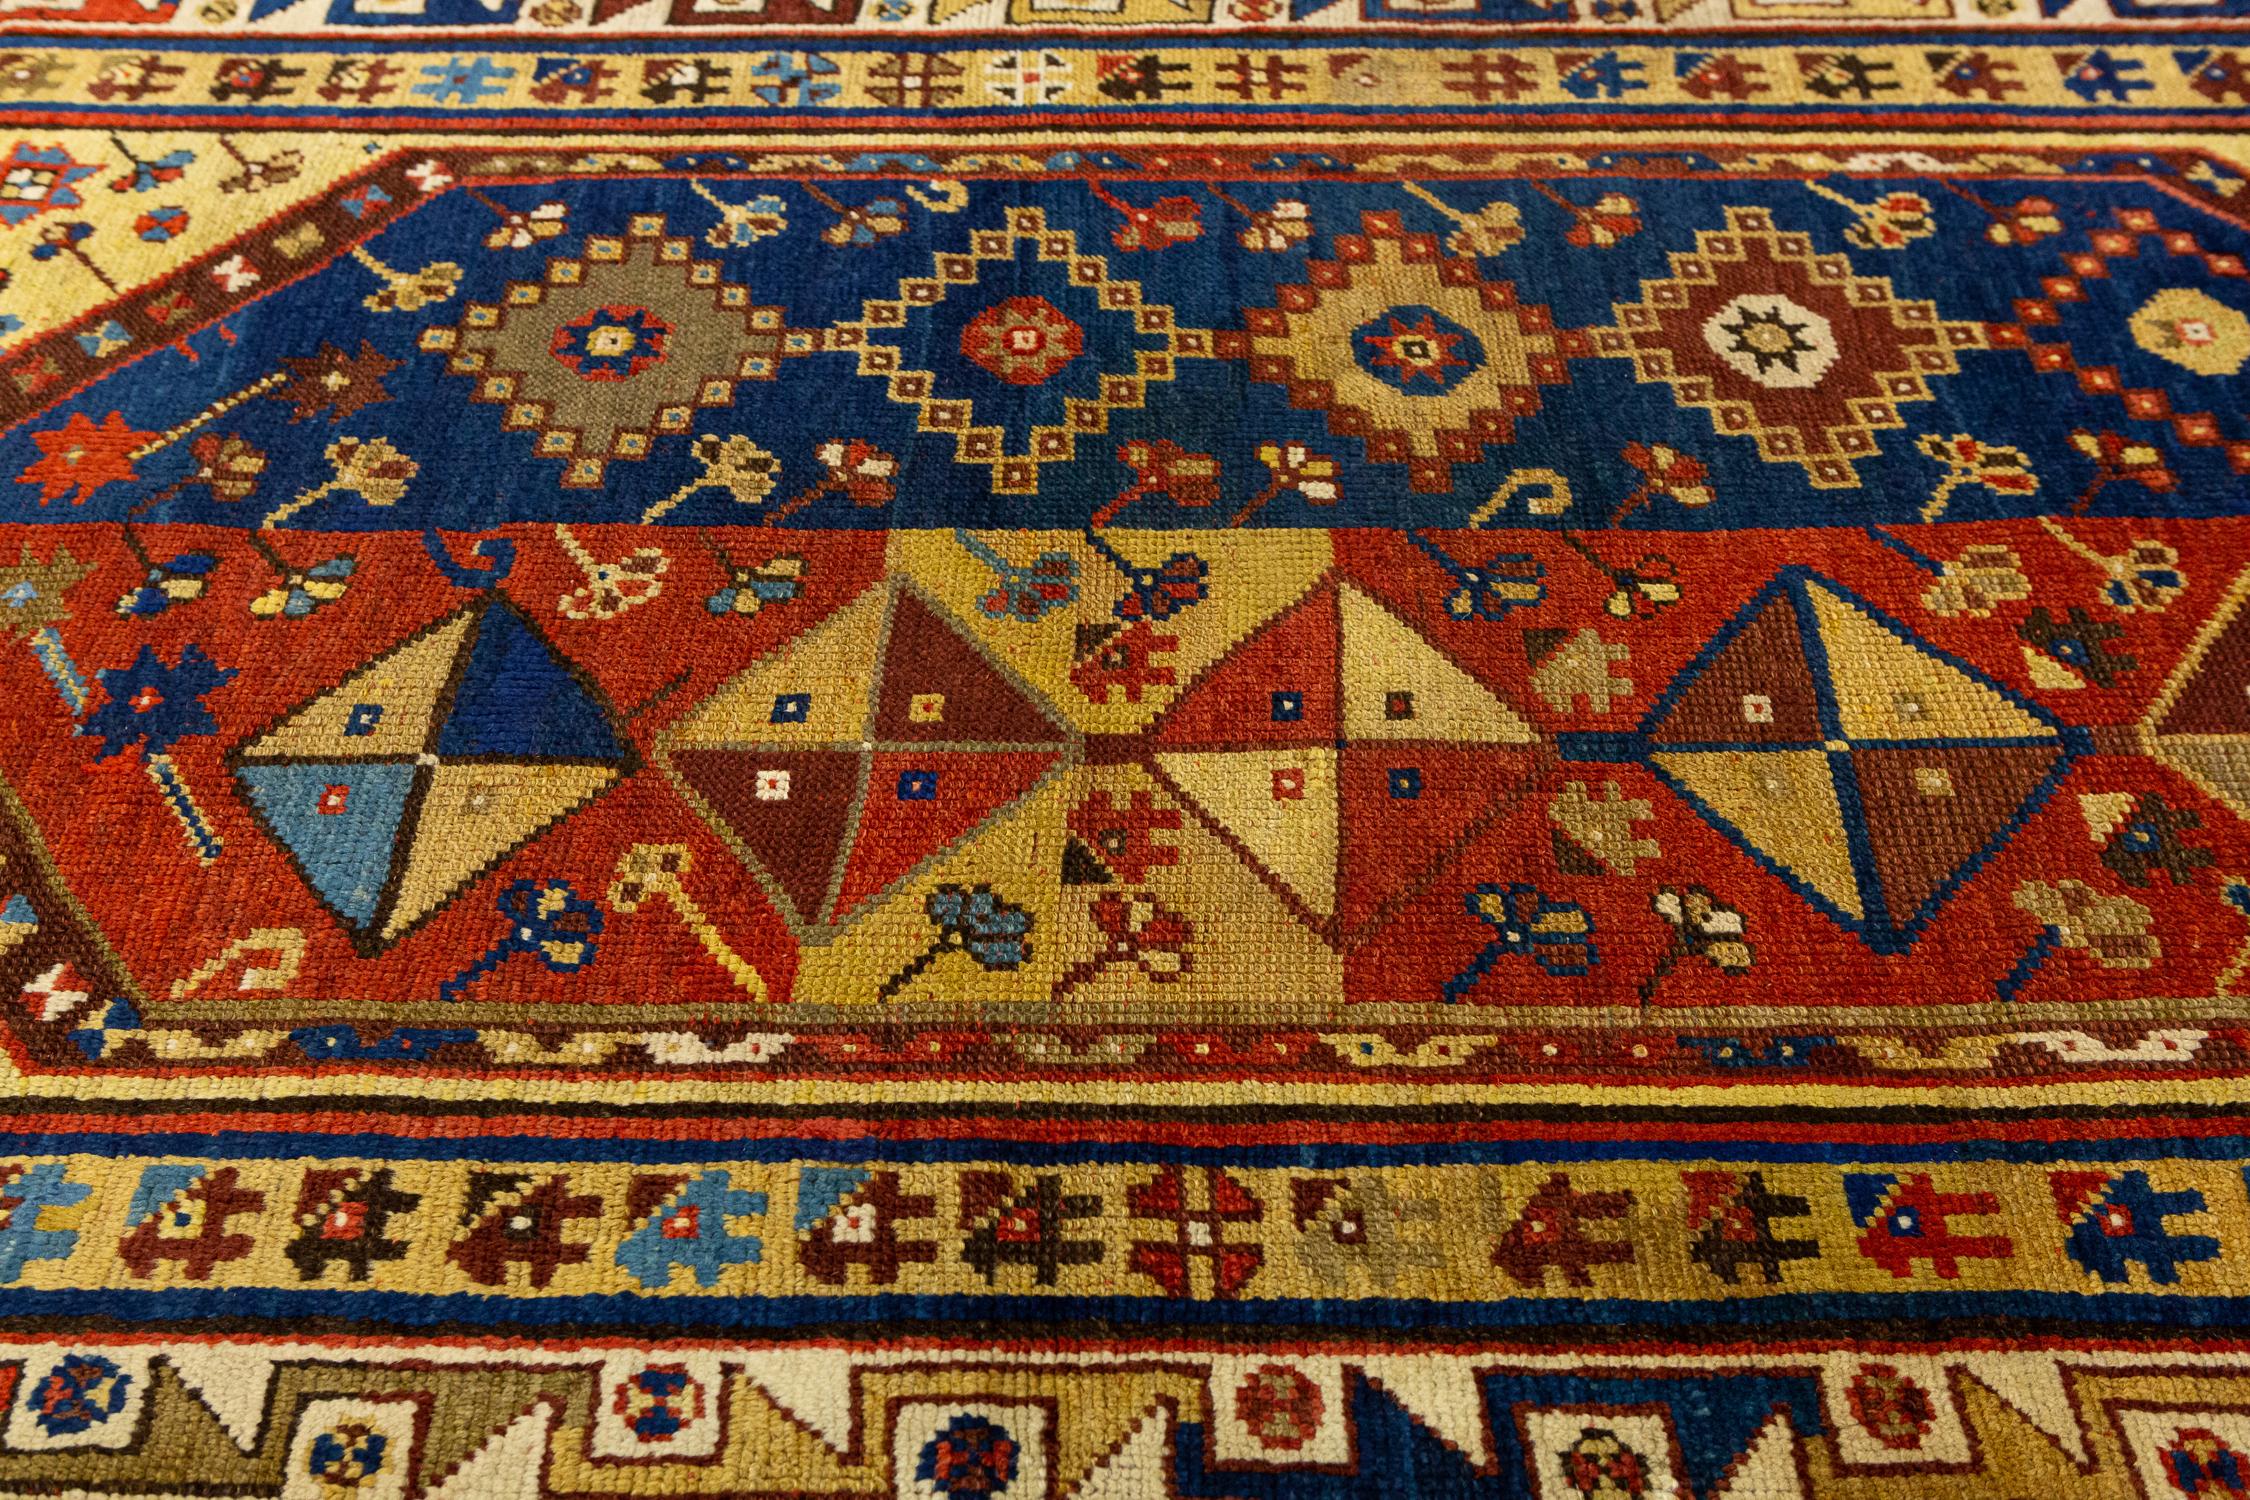 Hand-Knotted Antique Turkish Megri “Z” Motifs Wool Rug, Mid-19th Century For Sale